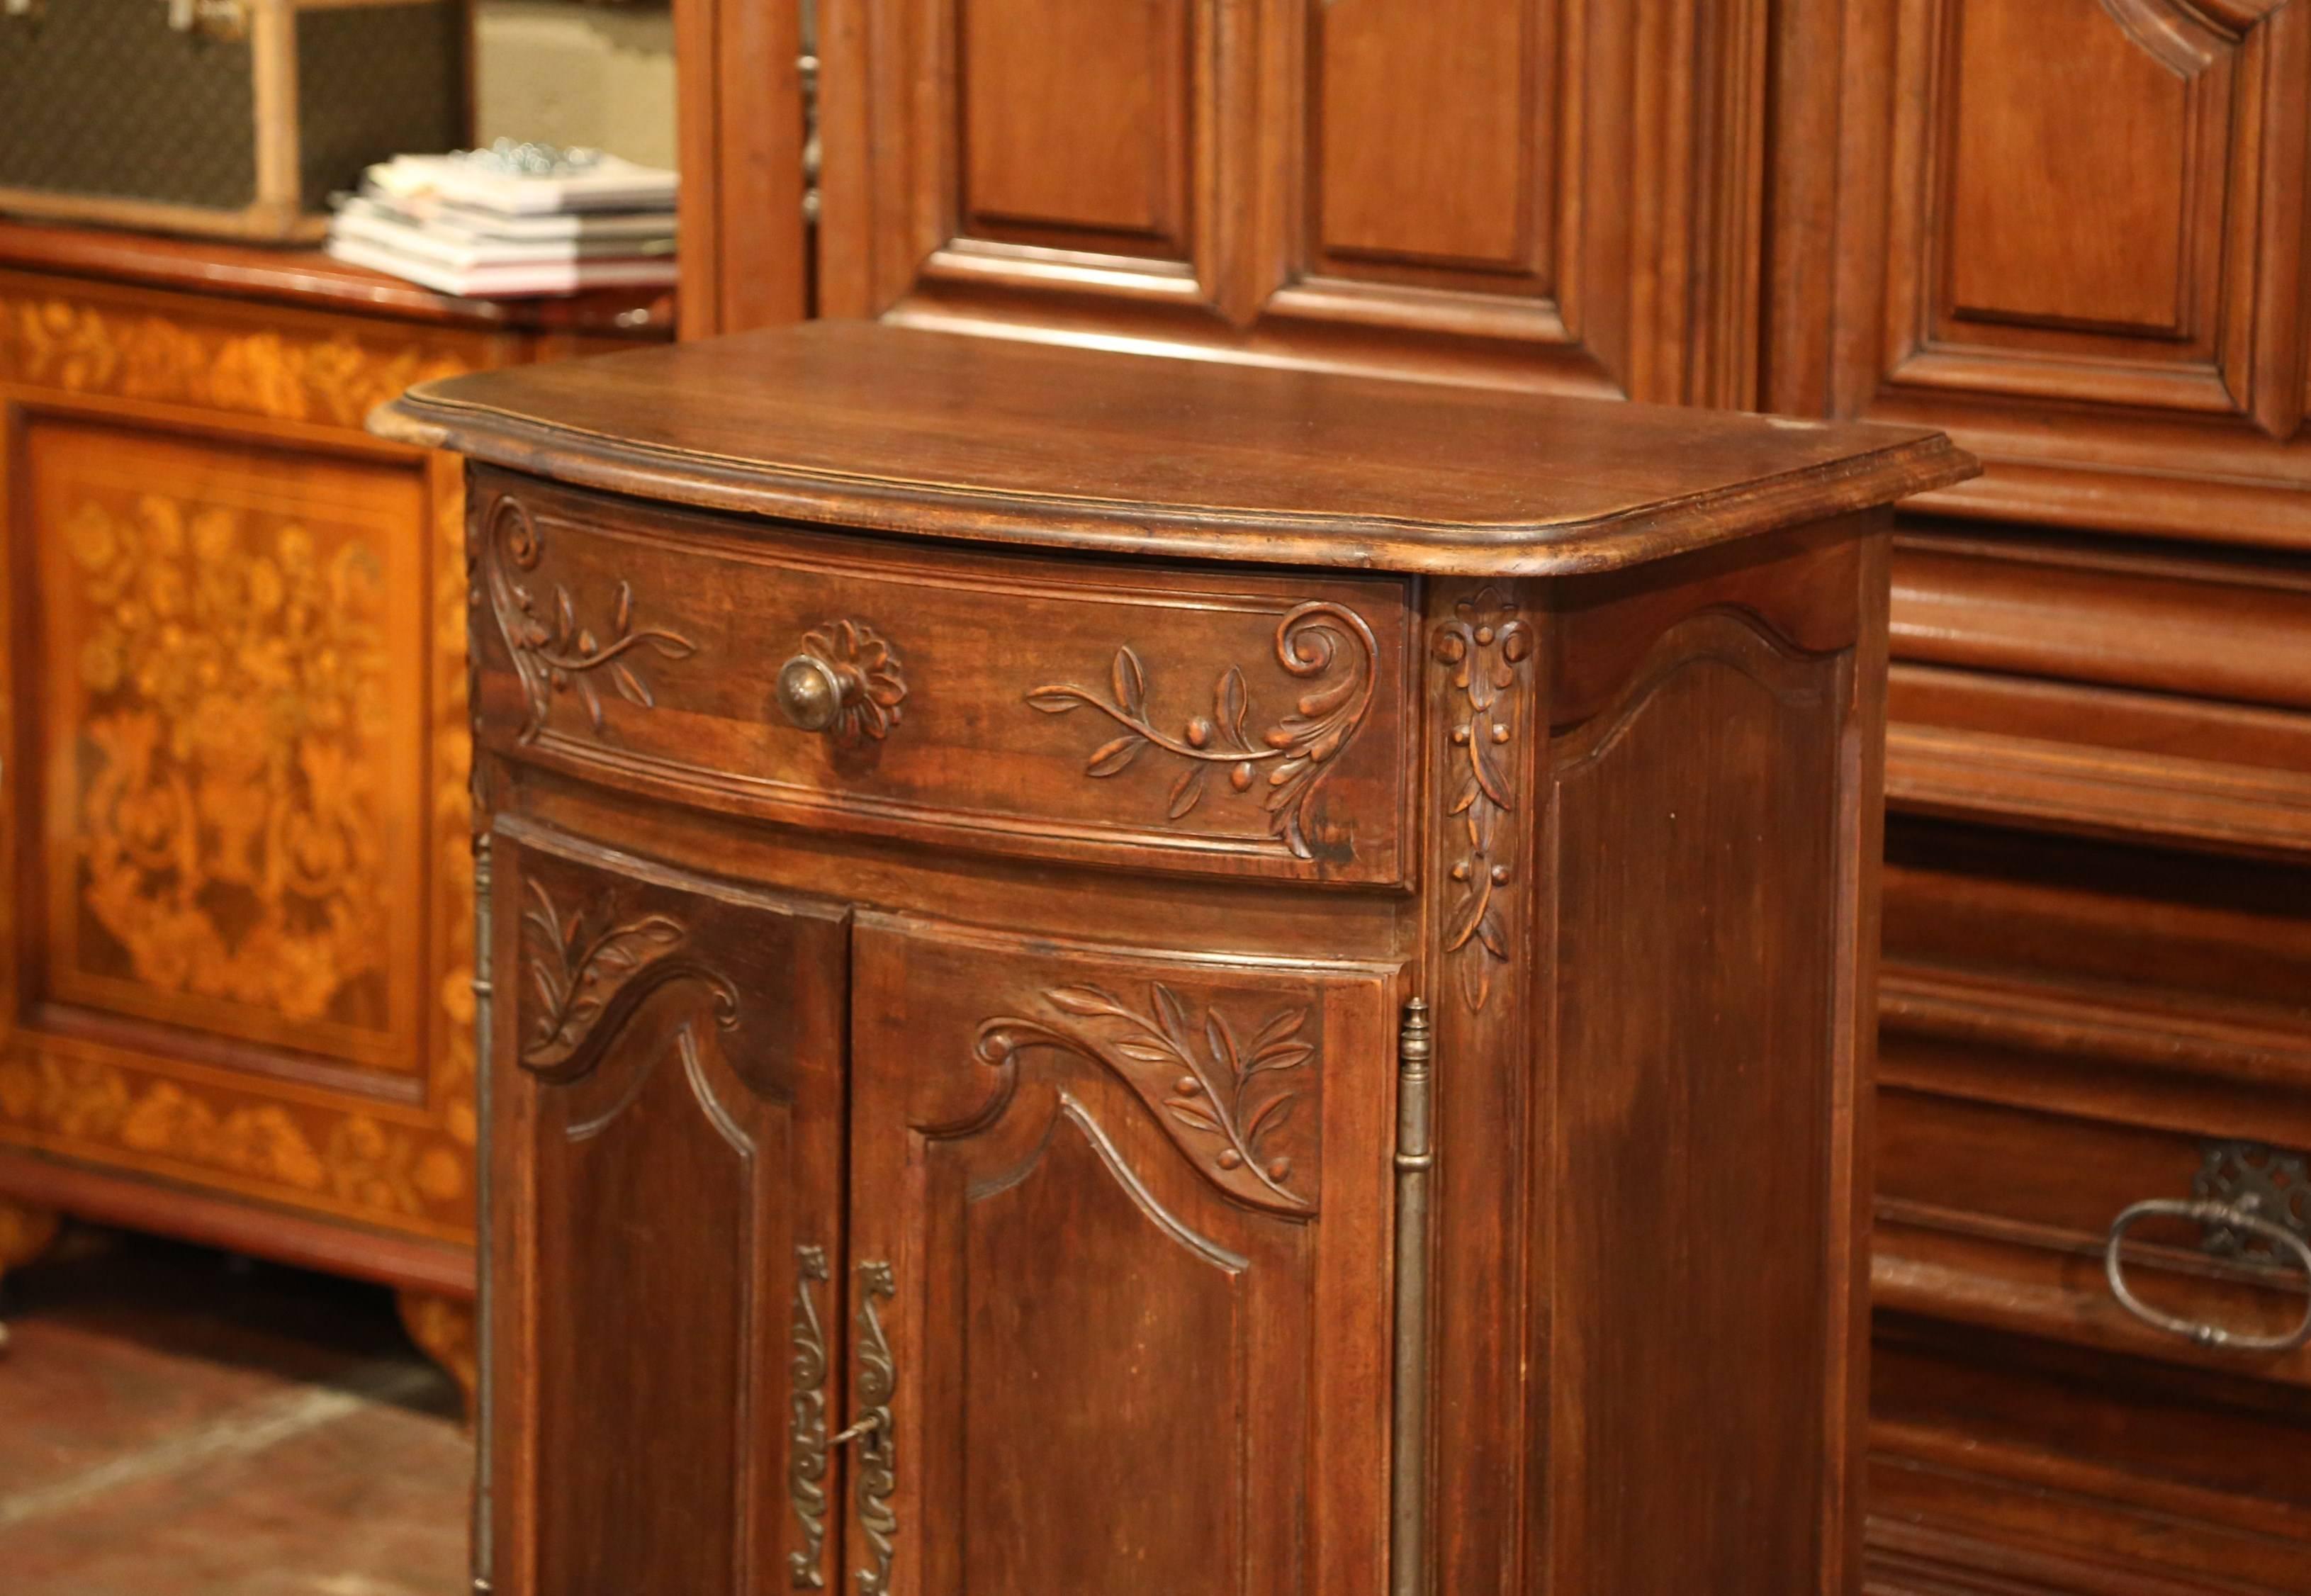 This antique fruit wood buffet was carved in southern France, circa 1920; the confiturier (French for jelly cabinet), sits on scroll feet and features a bowed front facade with carved centre drawer and two doors with inside shelving. The scalloped